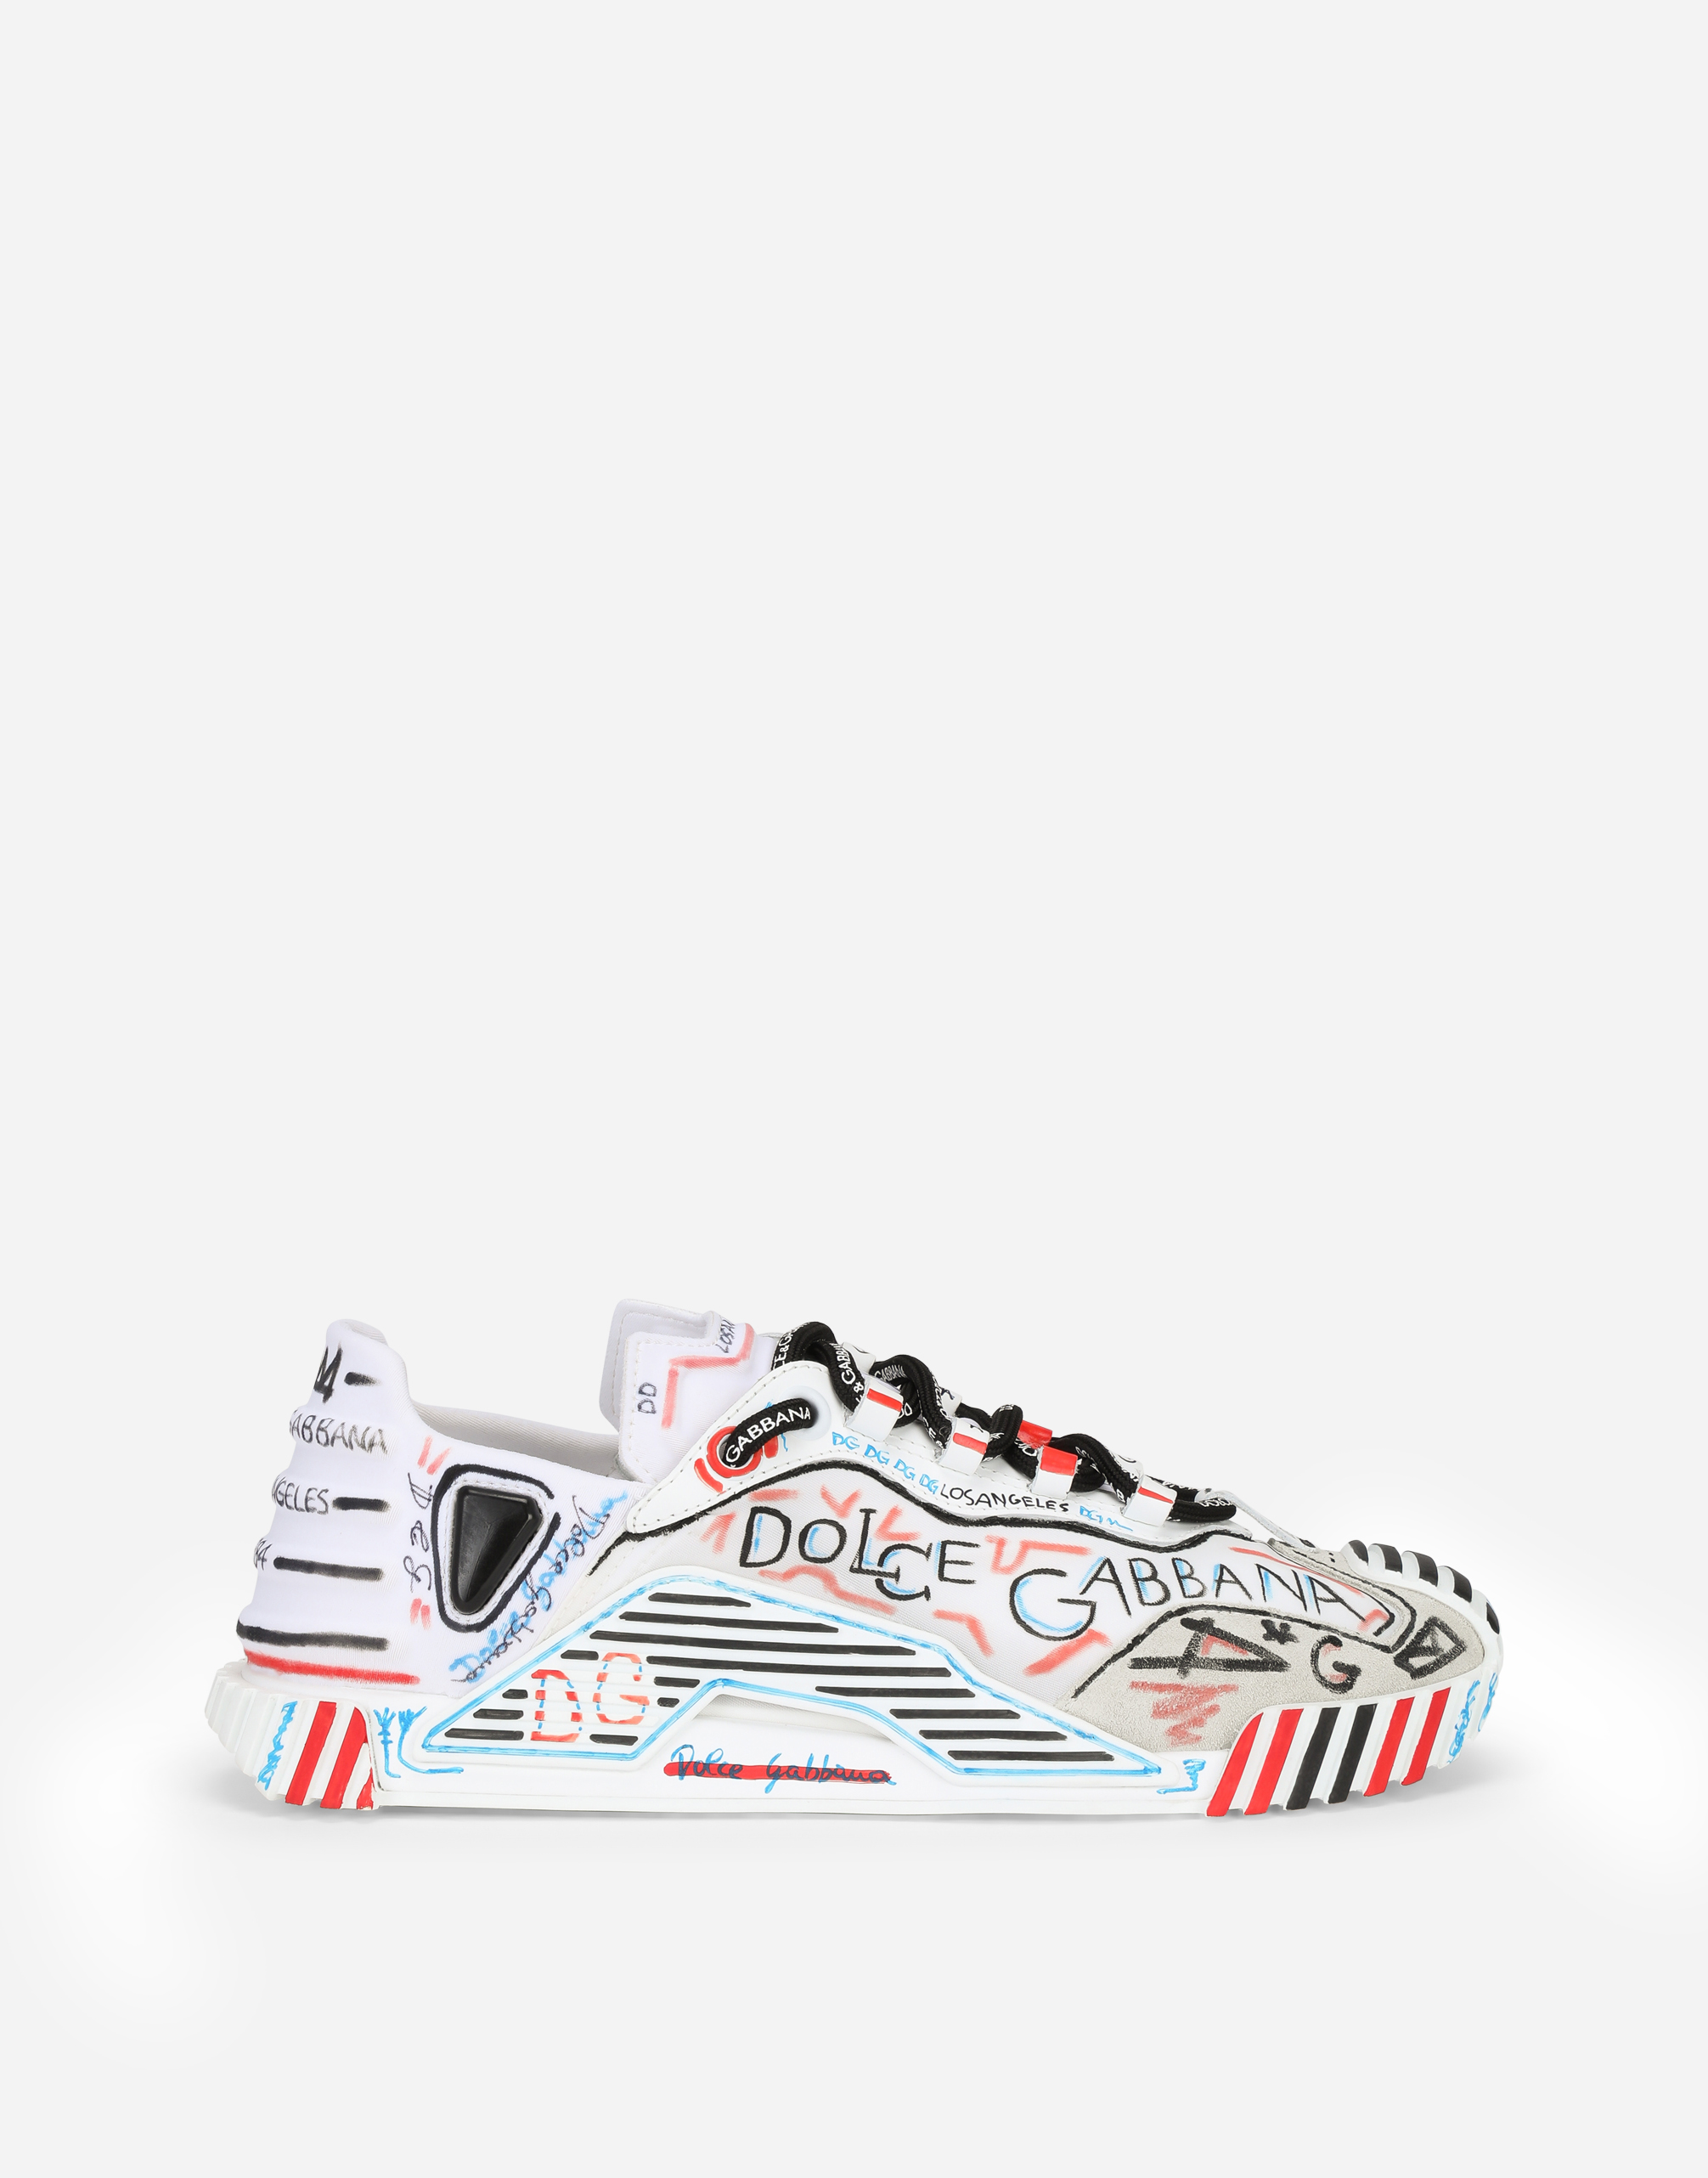 Mixed-materials Miami NS1 slip-on sneakers in Los Angeles